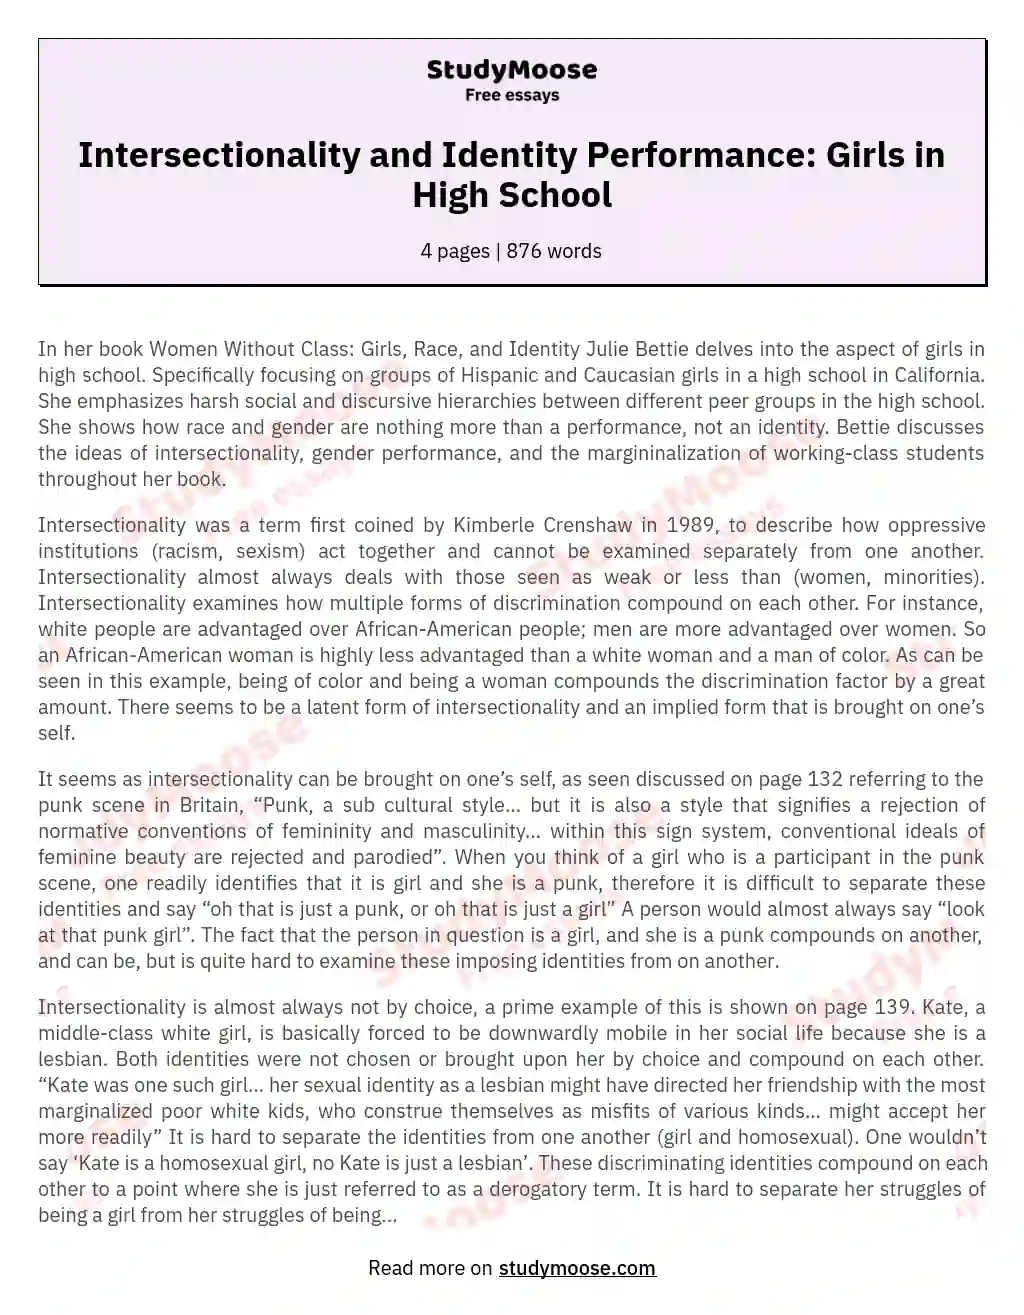 Intersectionality and Identity Performance: Girls in High School essay